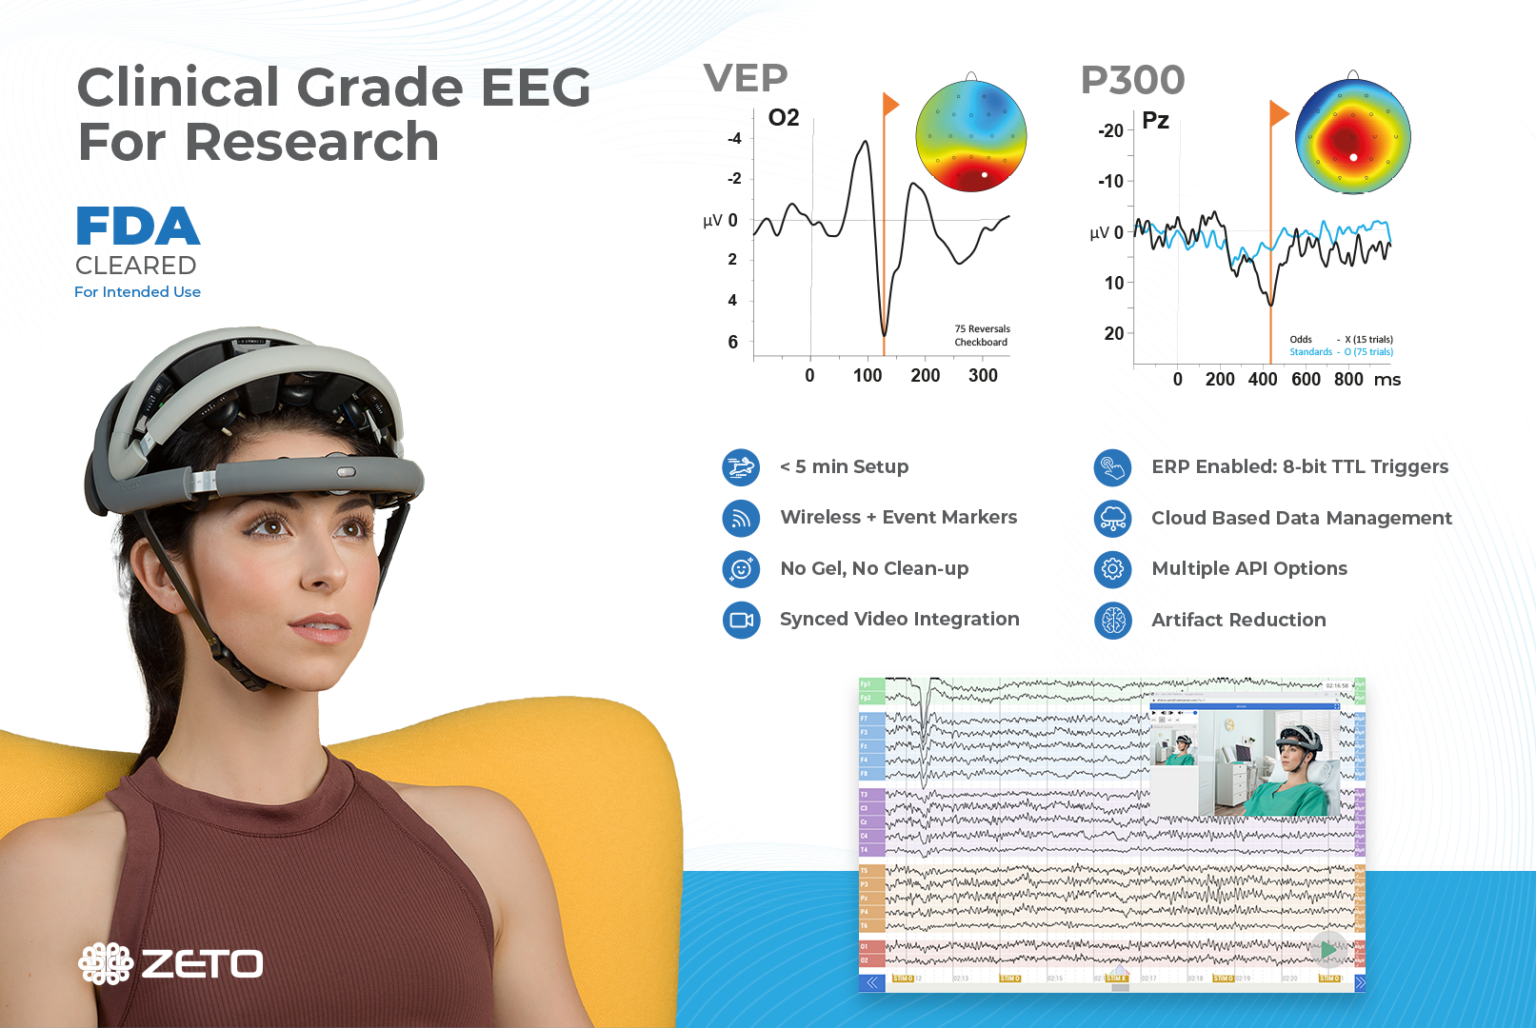 Clinical Grade EEG for Research. FDA Cleared 161